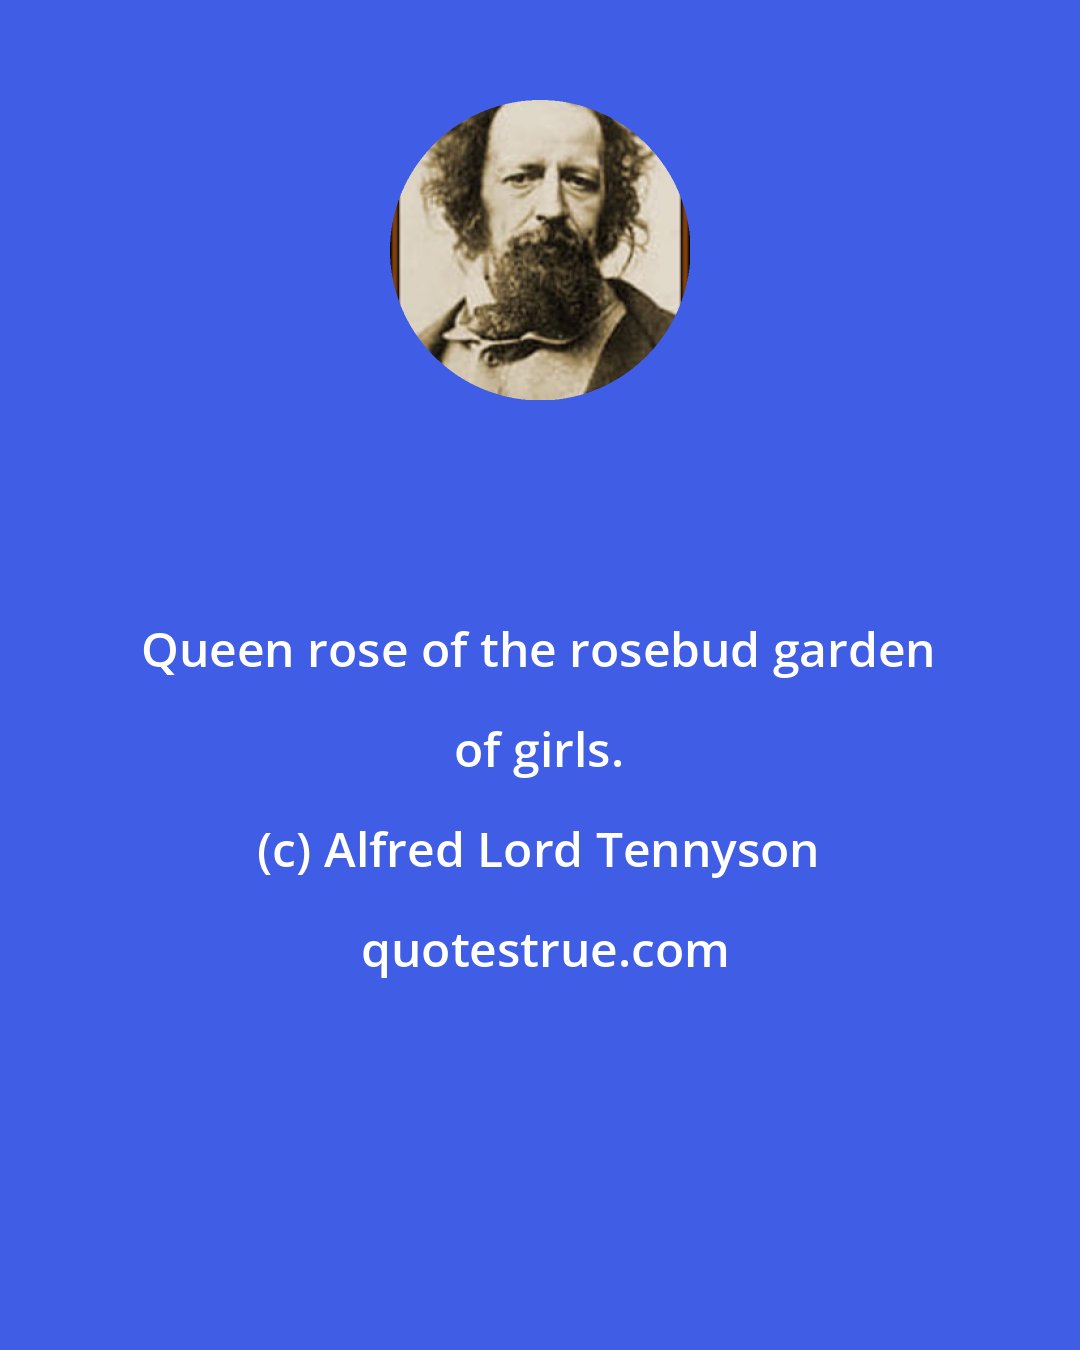 Alfred Lord Tennyson: Queen rose of the rosebud garden of girls.